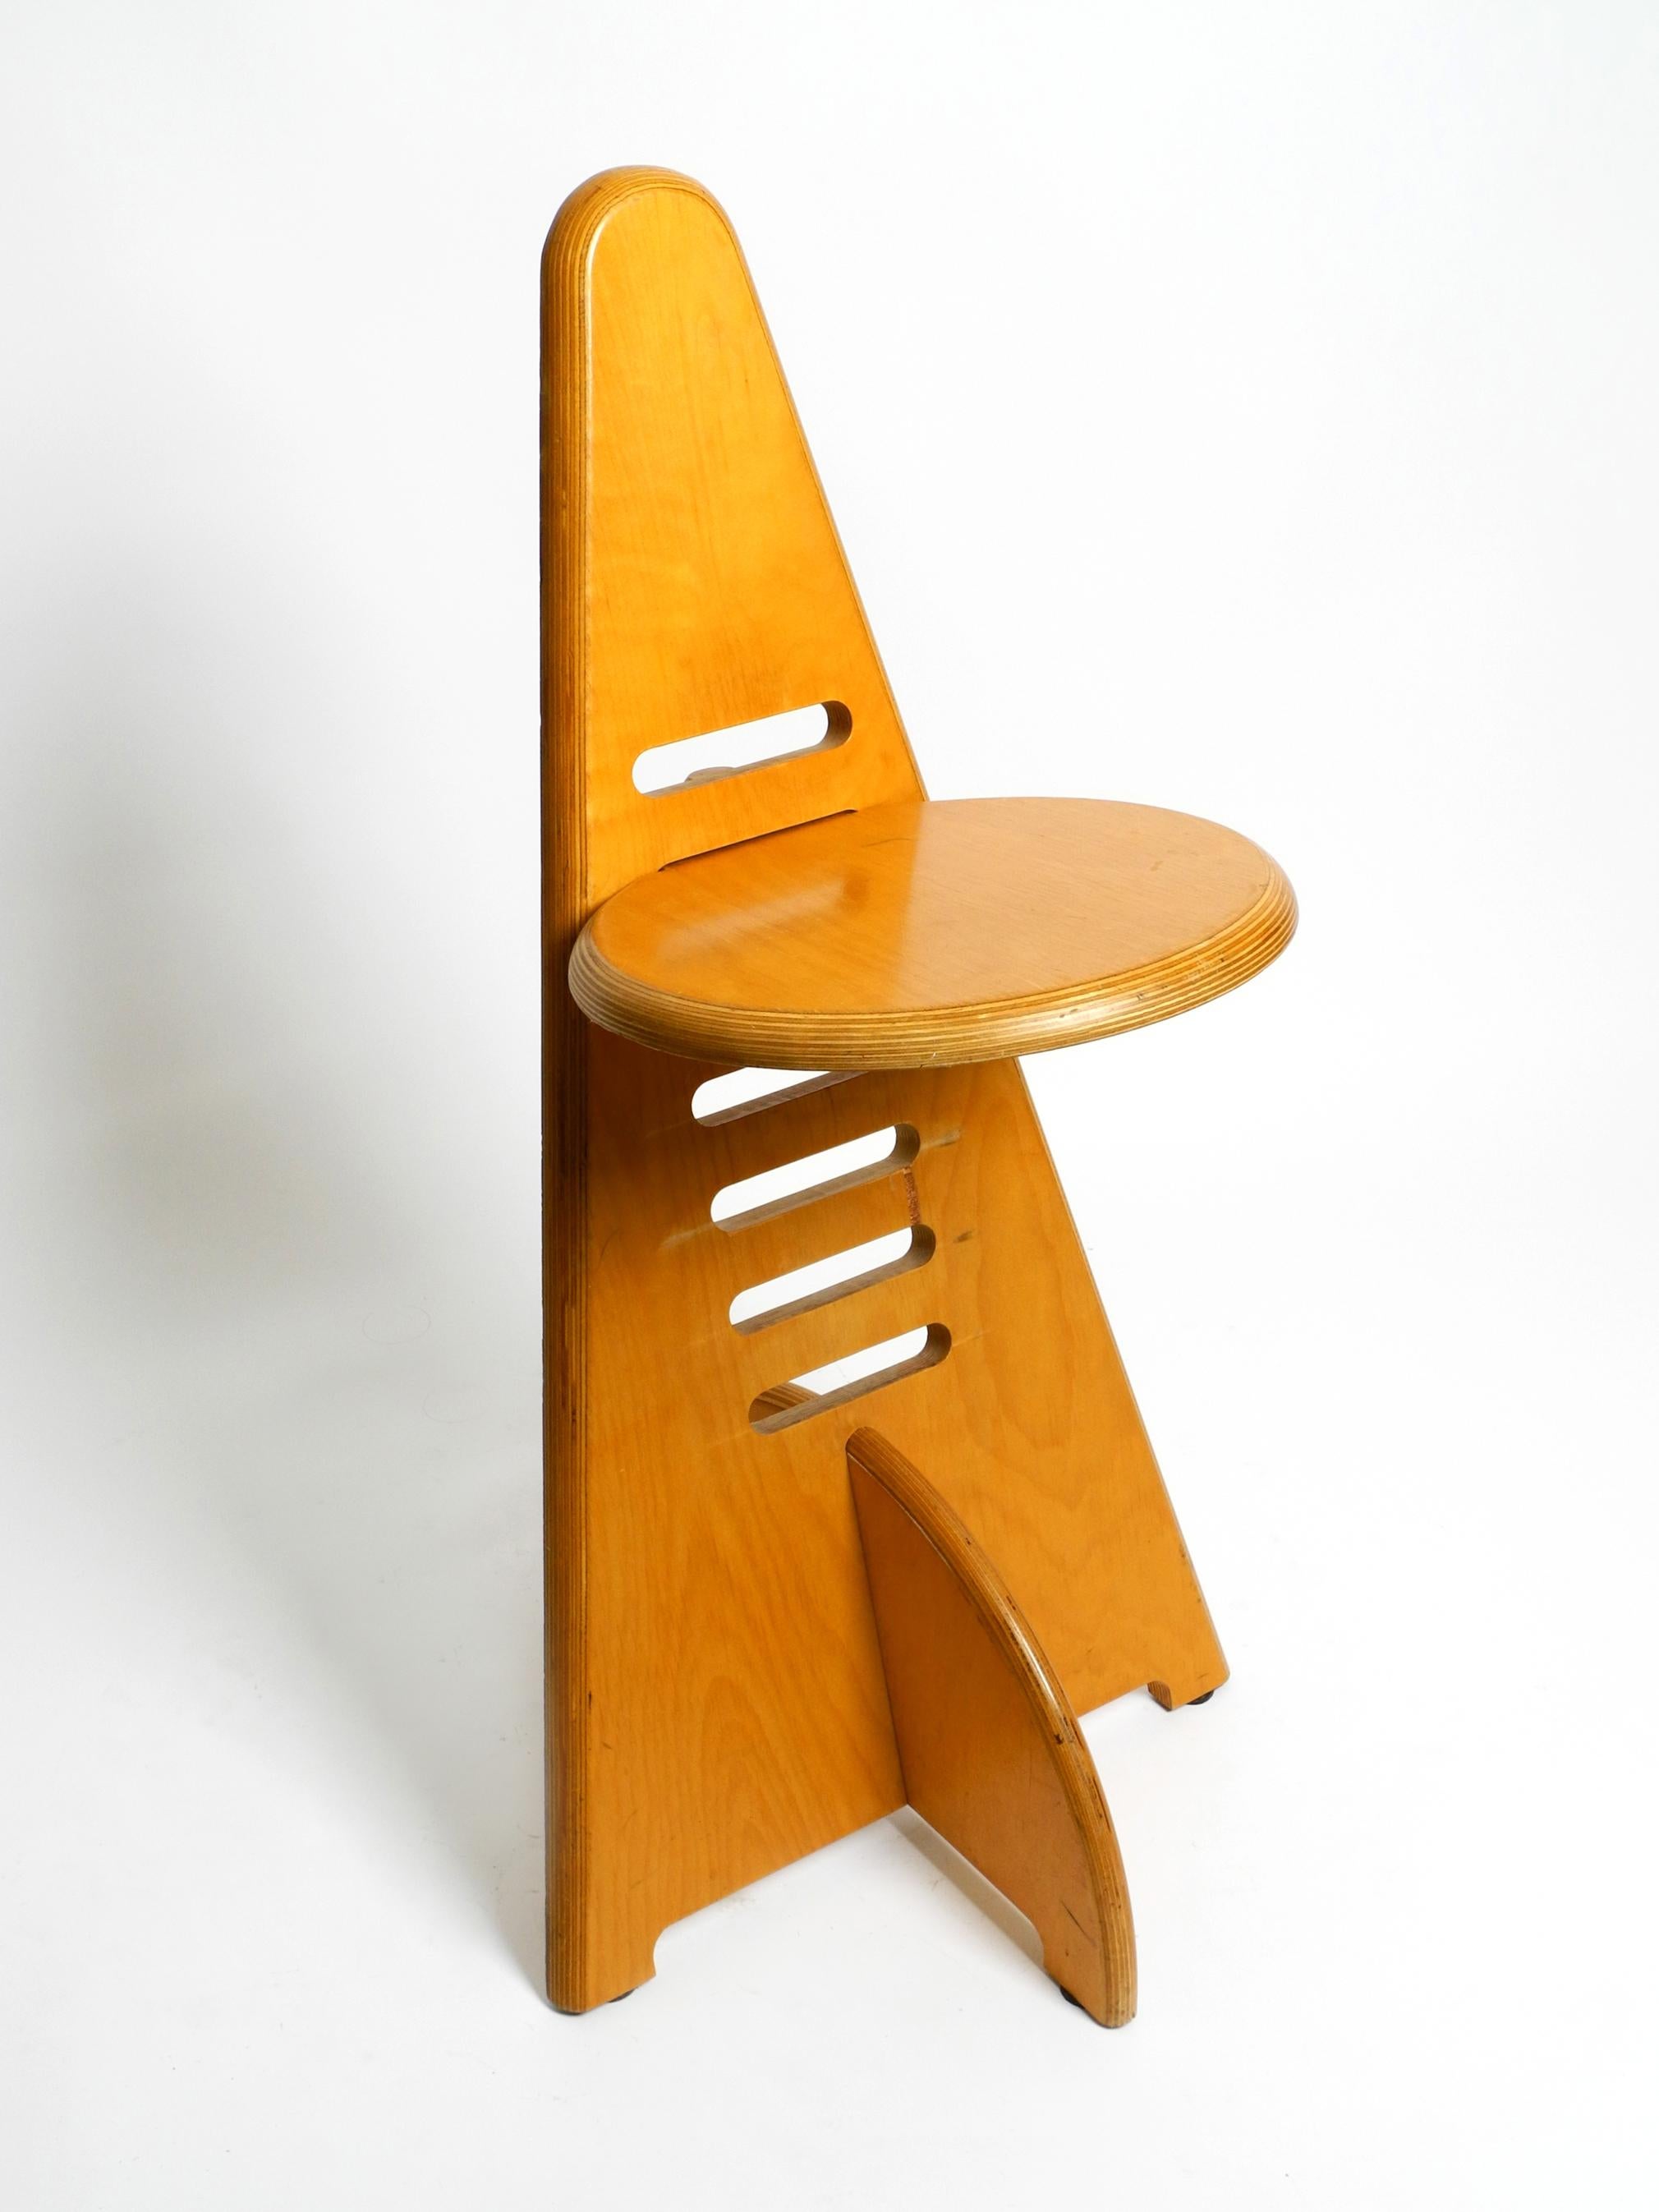 Beautiful 1970s Lundi Sit chair. Design by Gijs Boelaars. Manufactured by Lundia. Made in Netherlands.
Height-adjustable design classic made of birch multiplex.
Triangular shape with a round seat.
Can be used as a chair, bar stool, children's